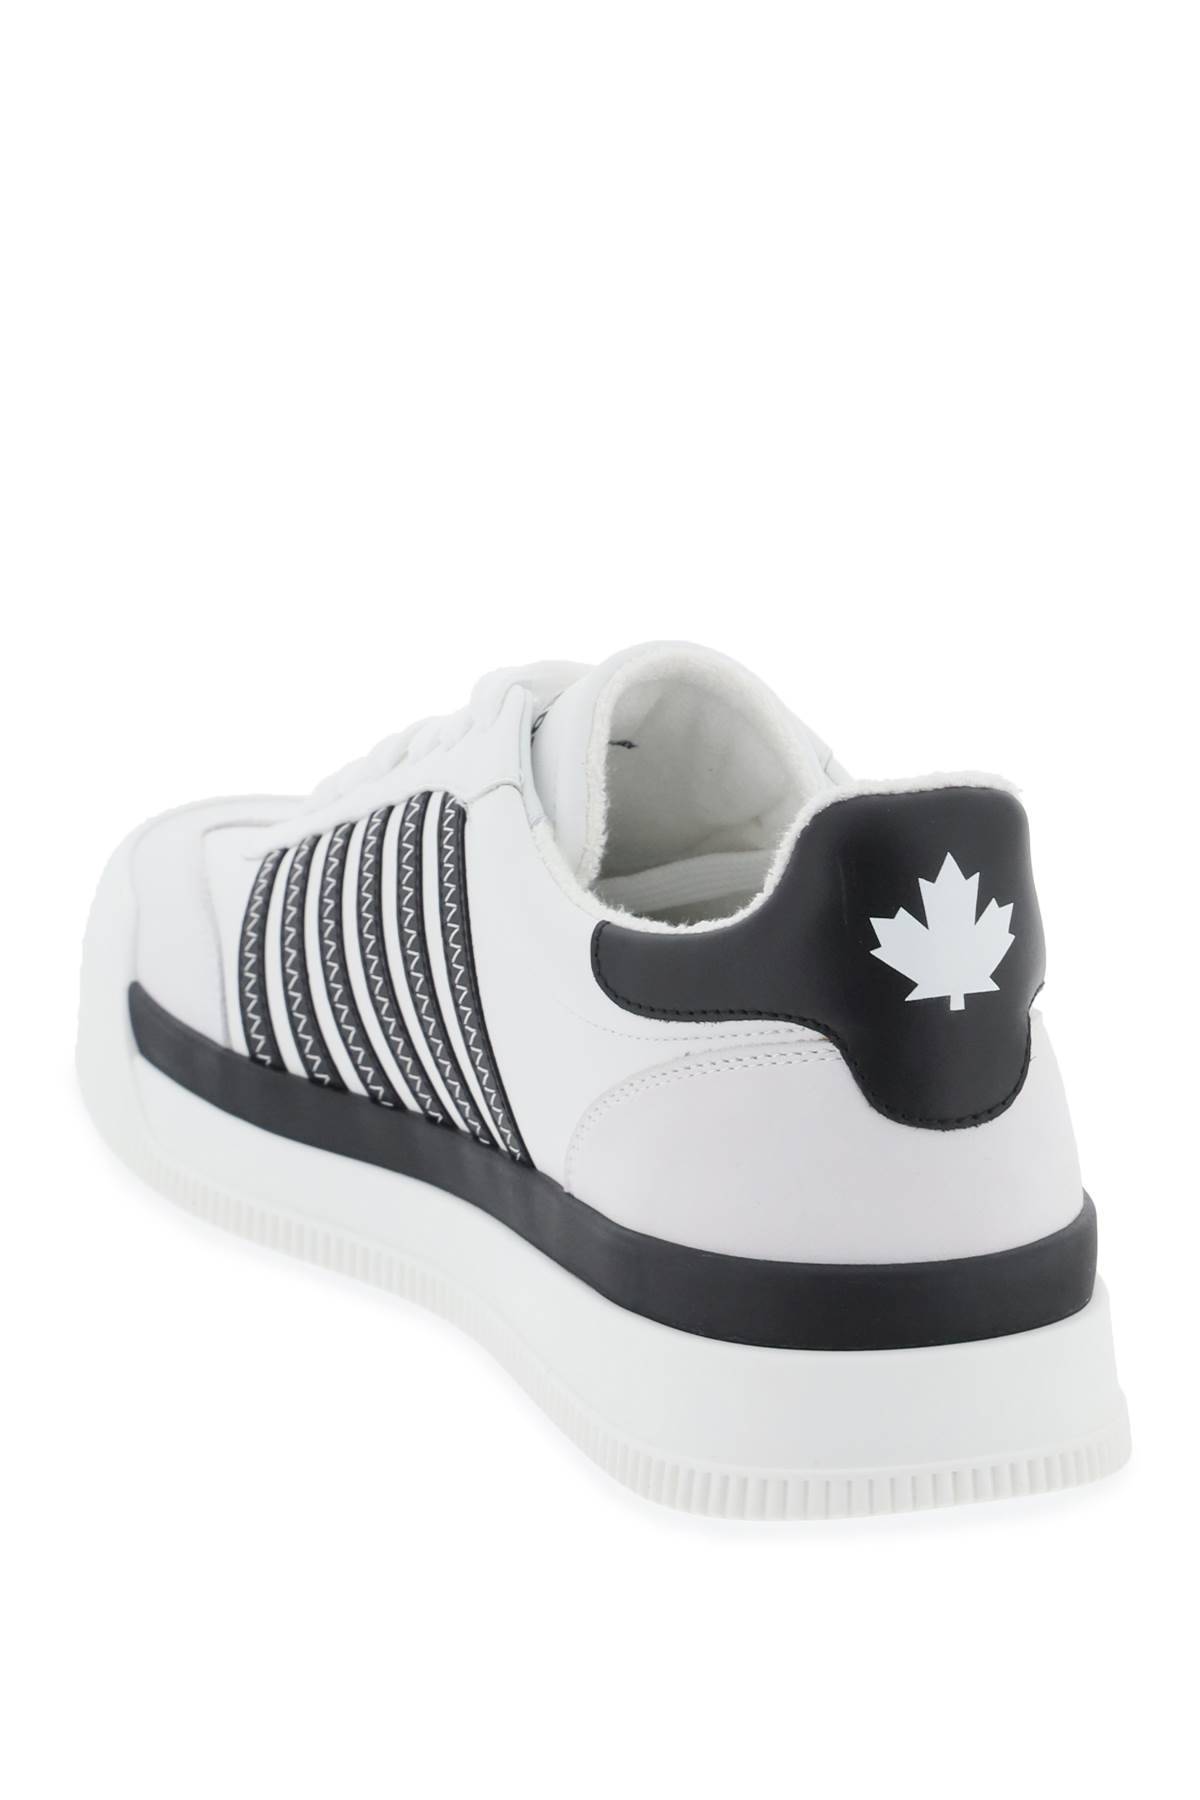 Shop Dsquared2 New Jersey Sneakers In White,black